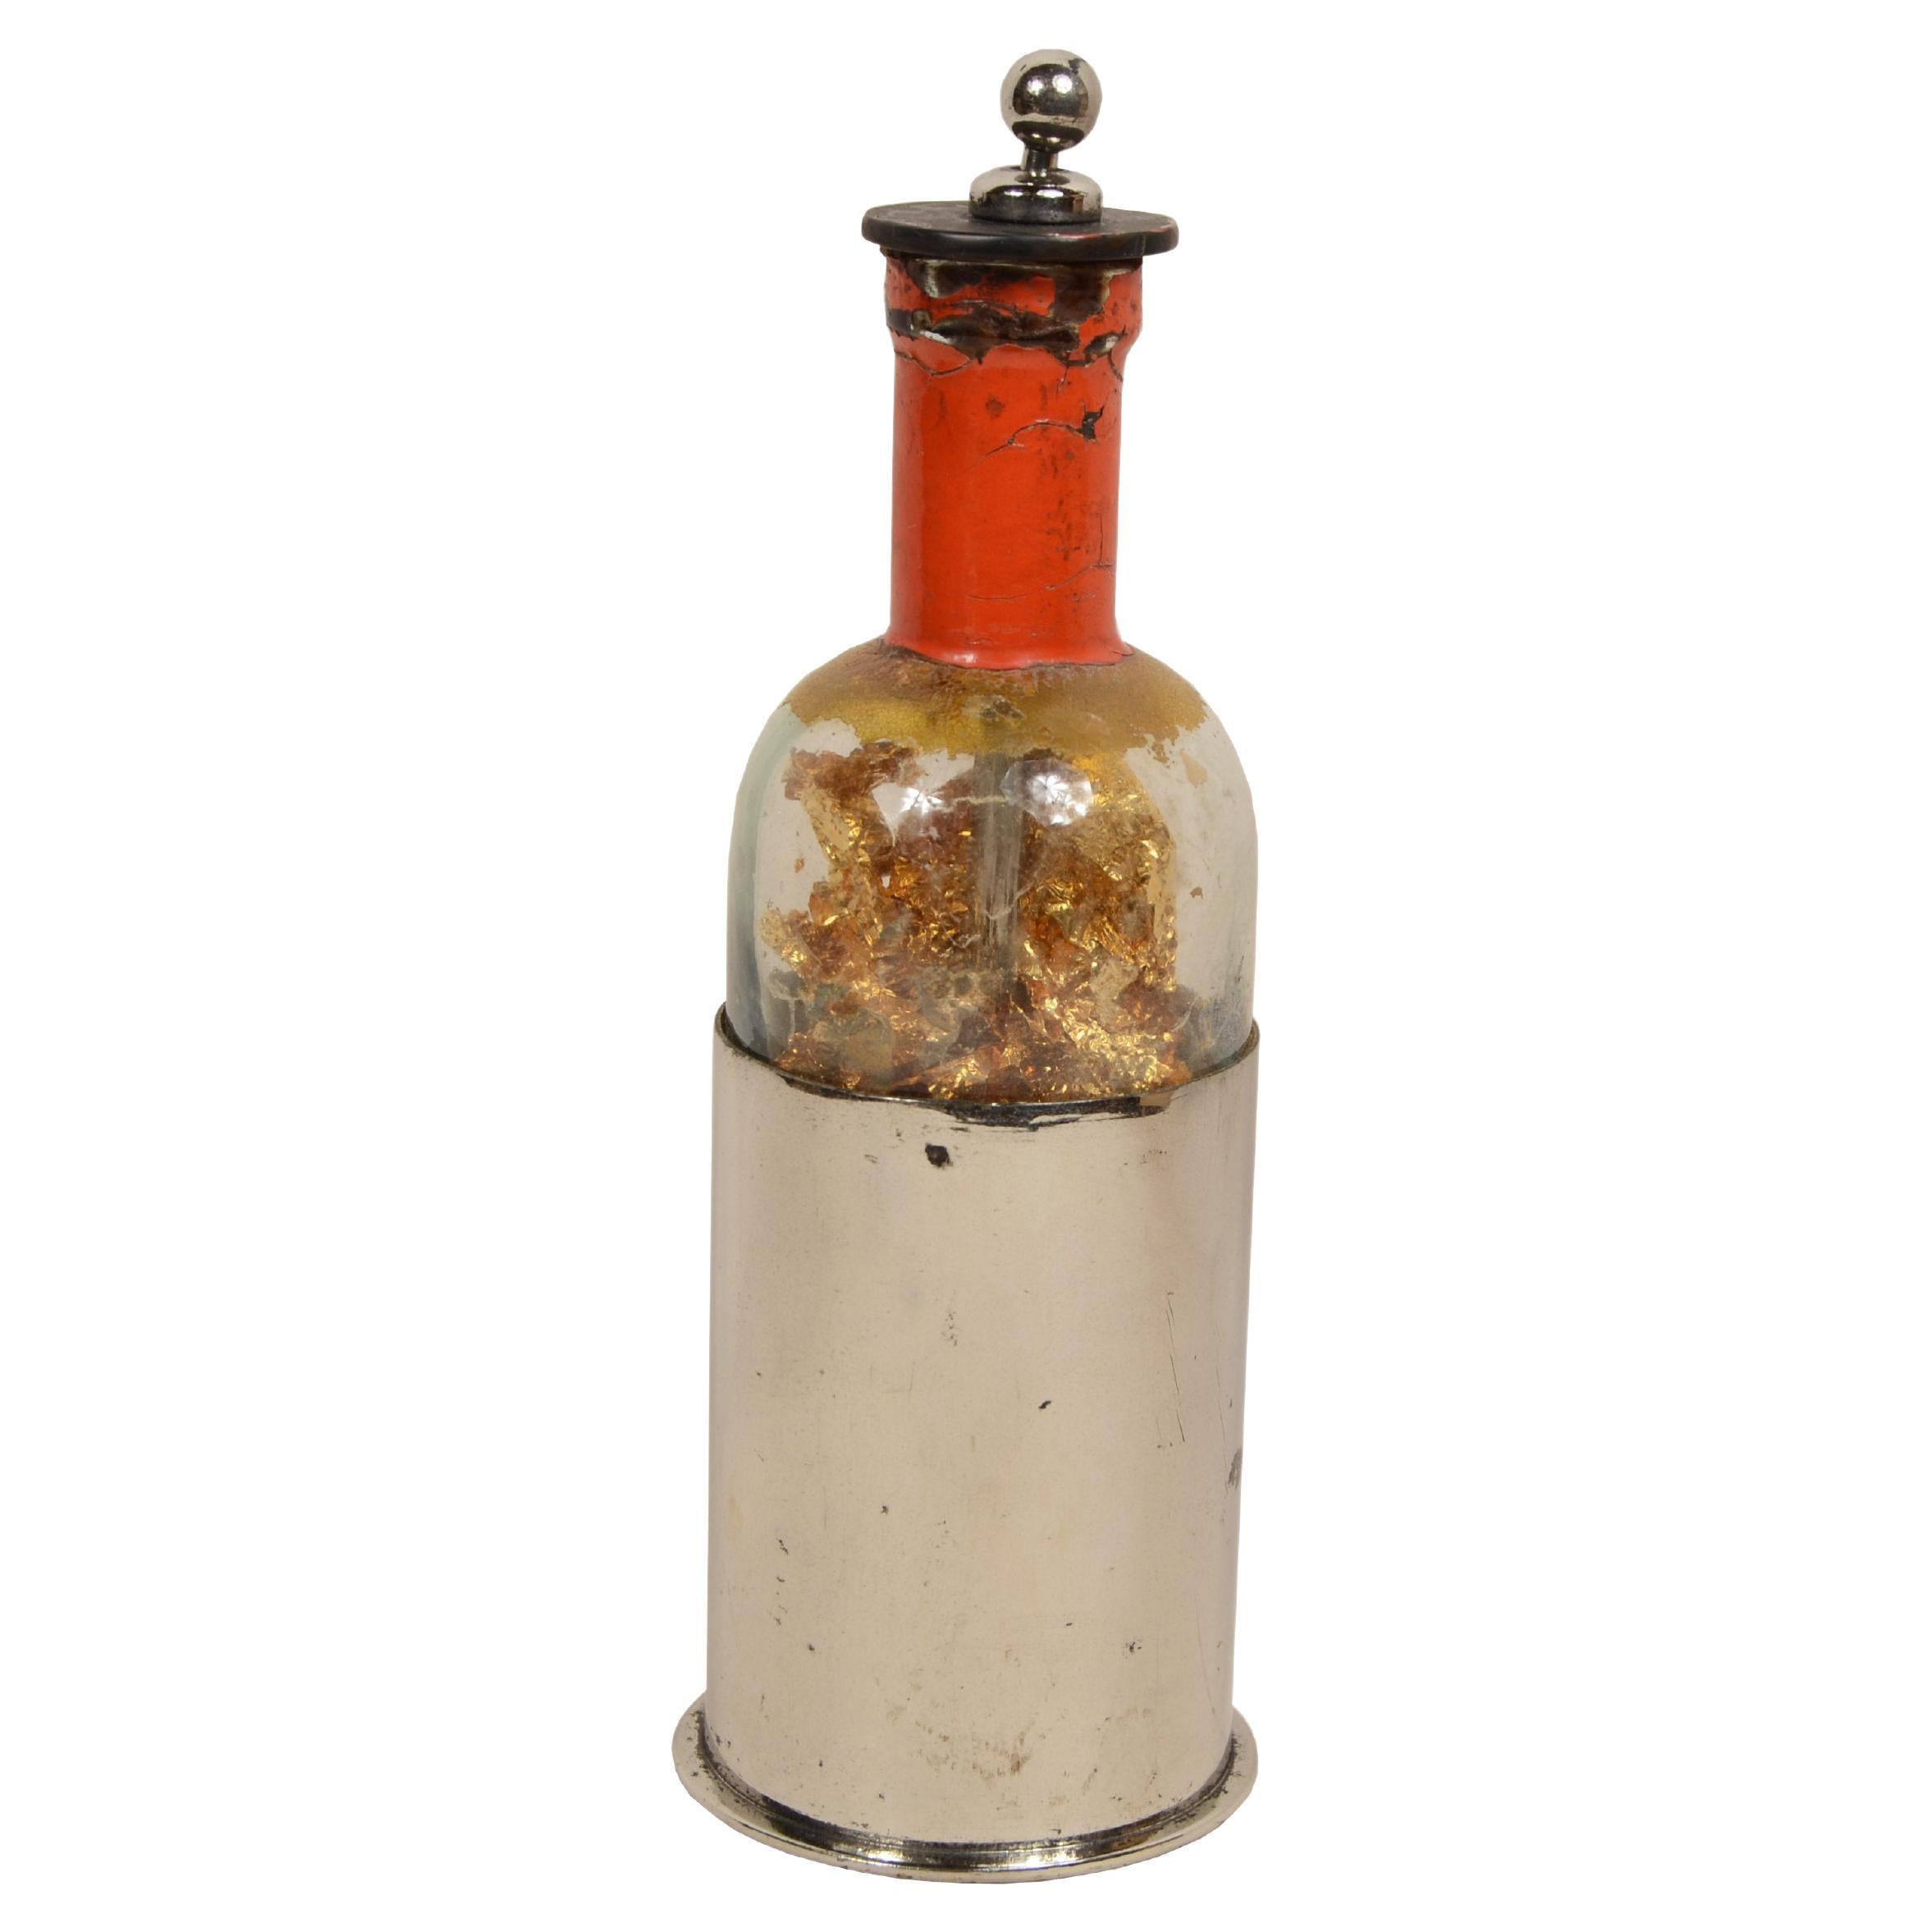 Leiden bottle from the second half of the 19th century holds electrical charges